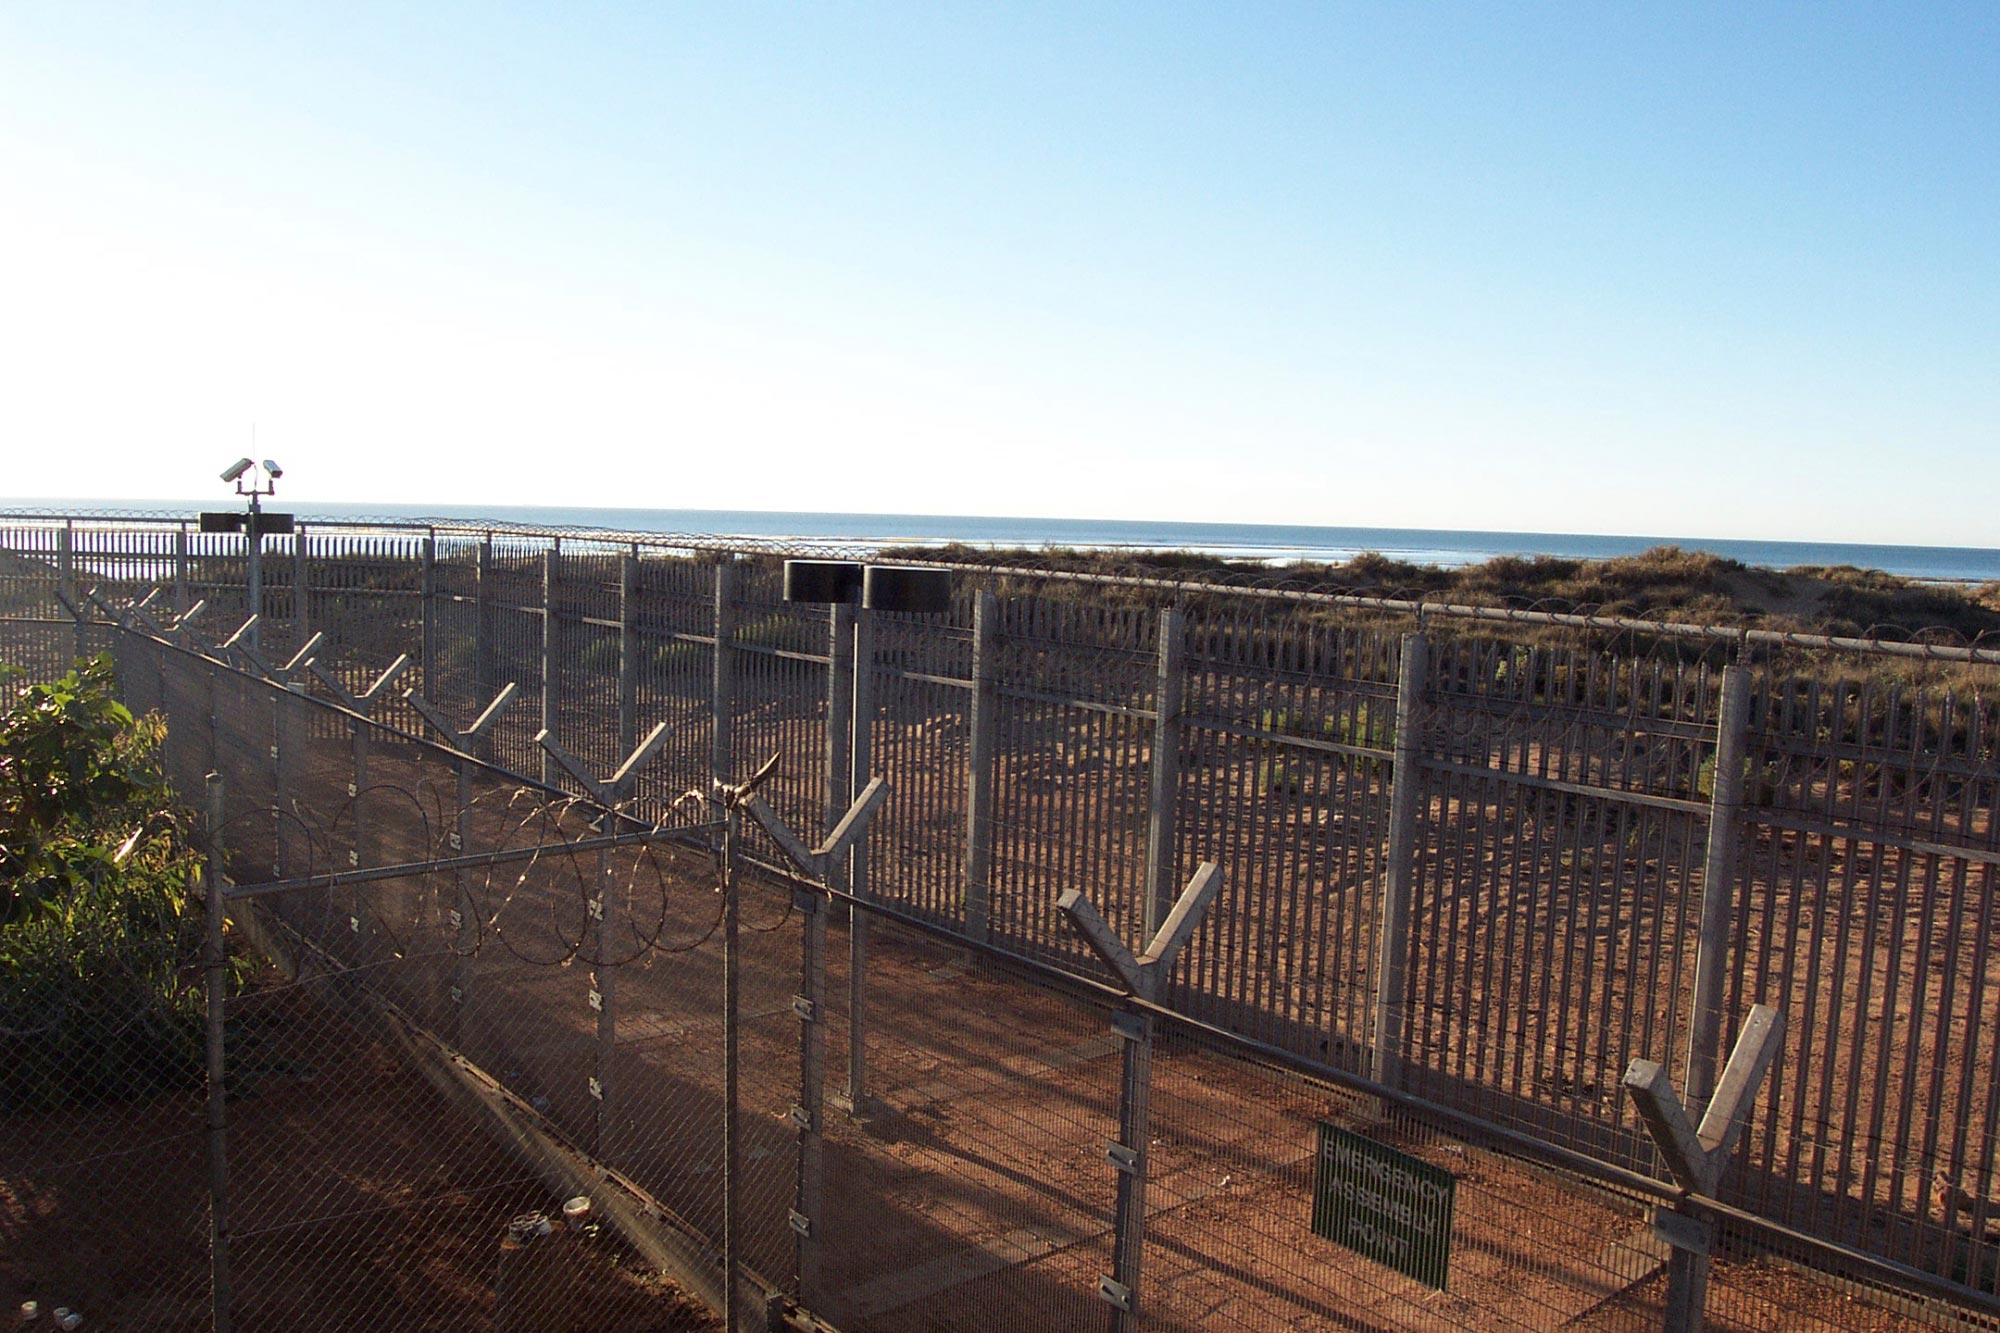 View through the fence at the Port Hedland Detention Centre.